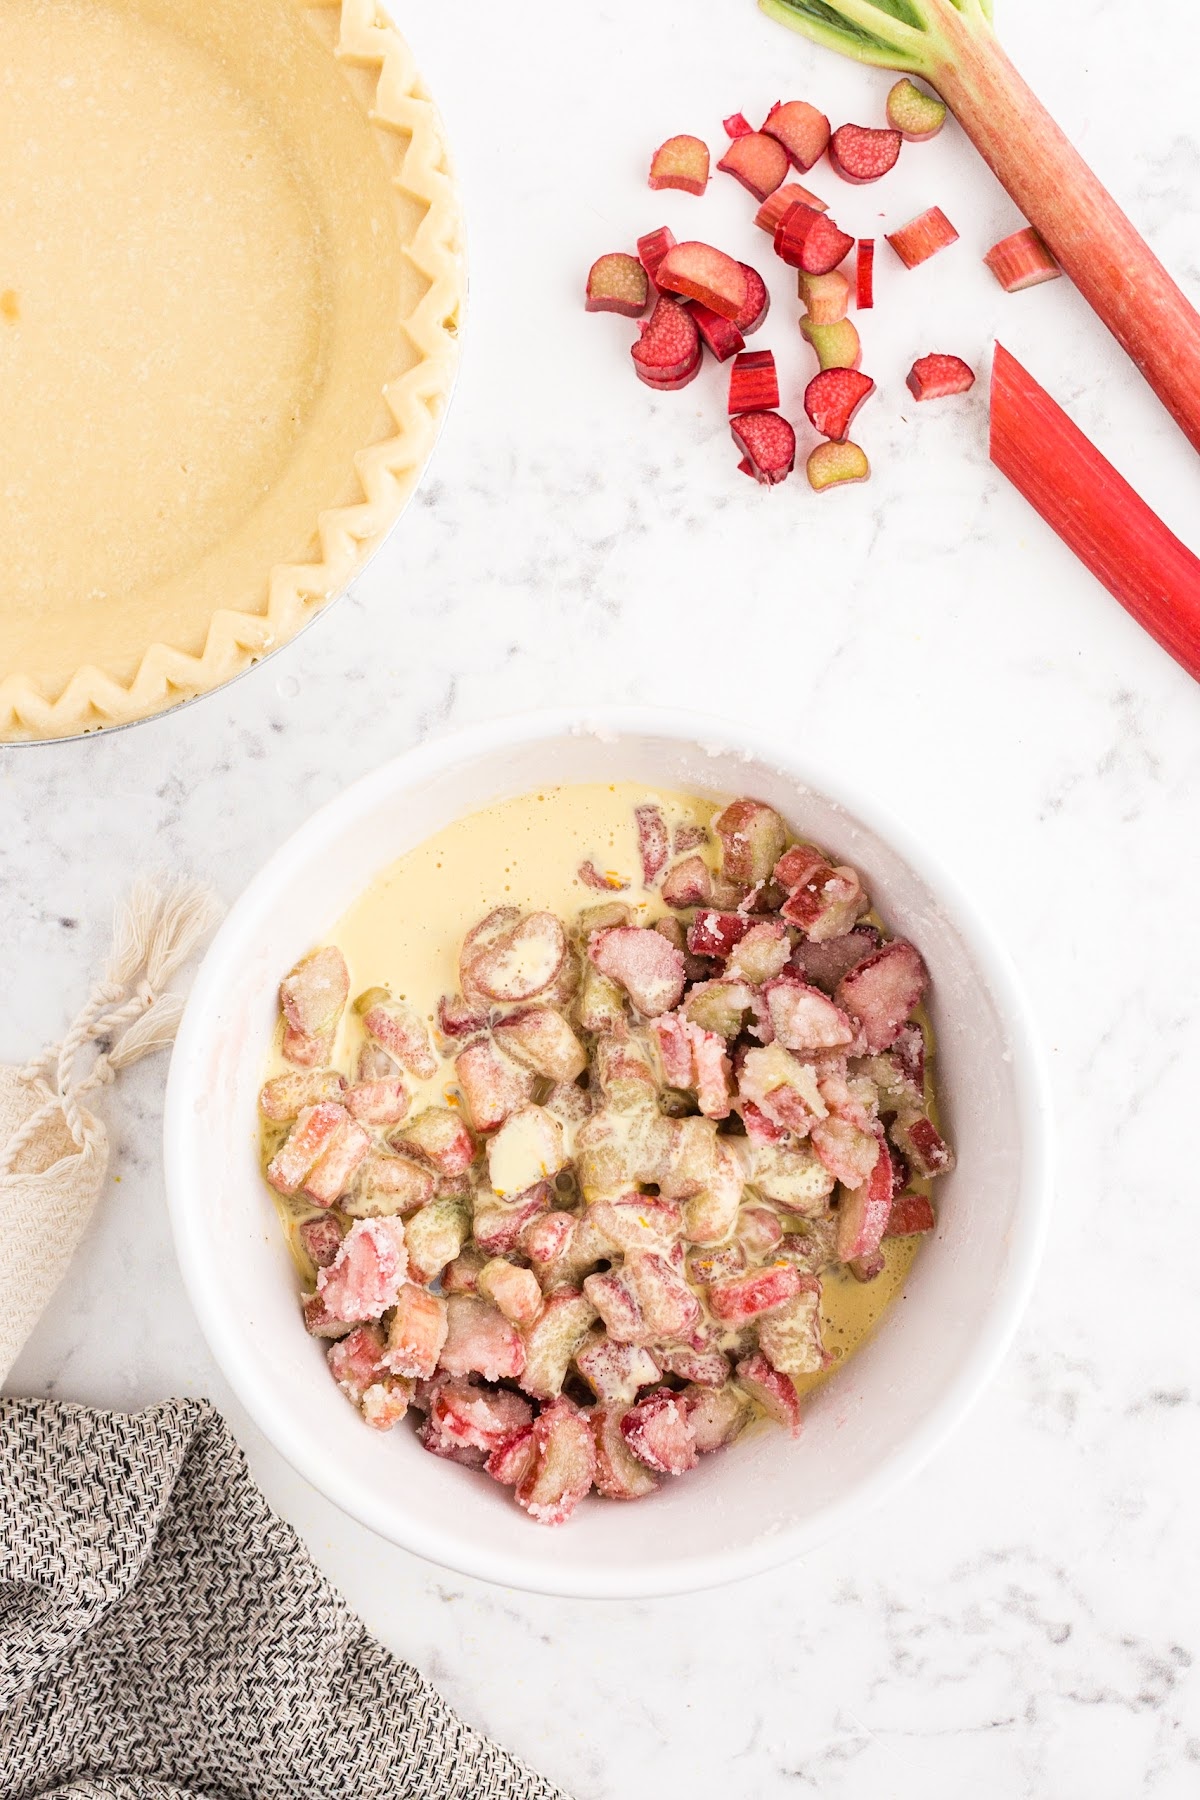 Rhubarb pieces and custard mixture together in a bowl with unbaked pie crust nearby.